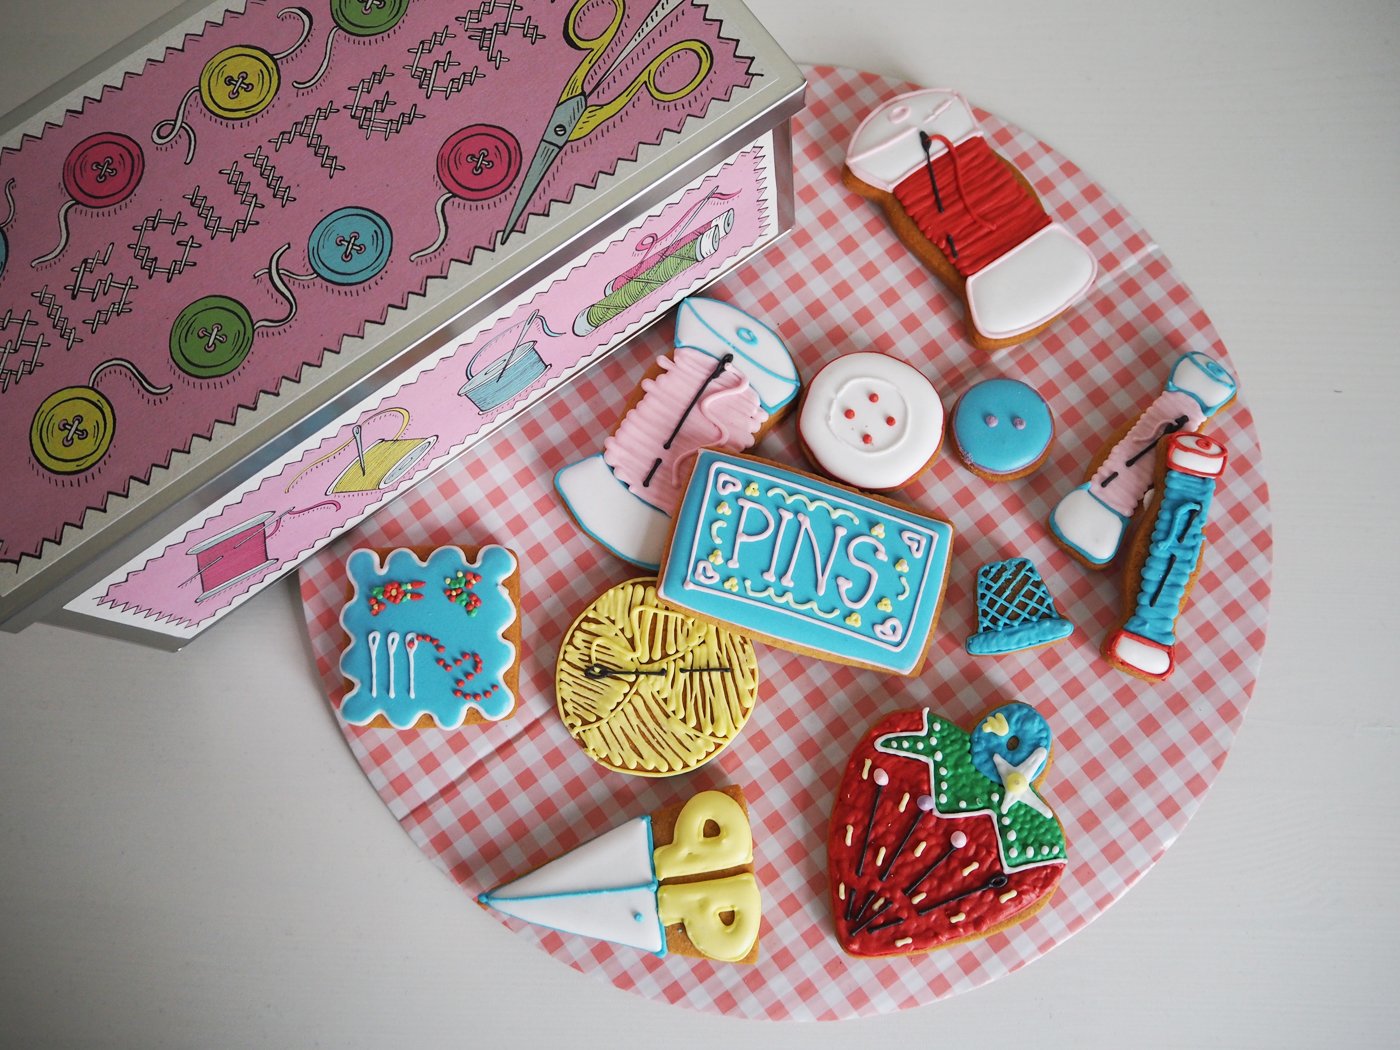 Mother's Day biscuits from Biscuiteers